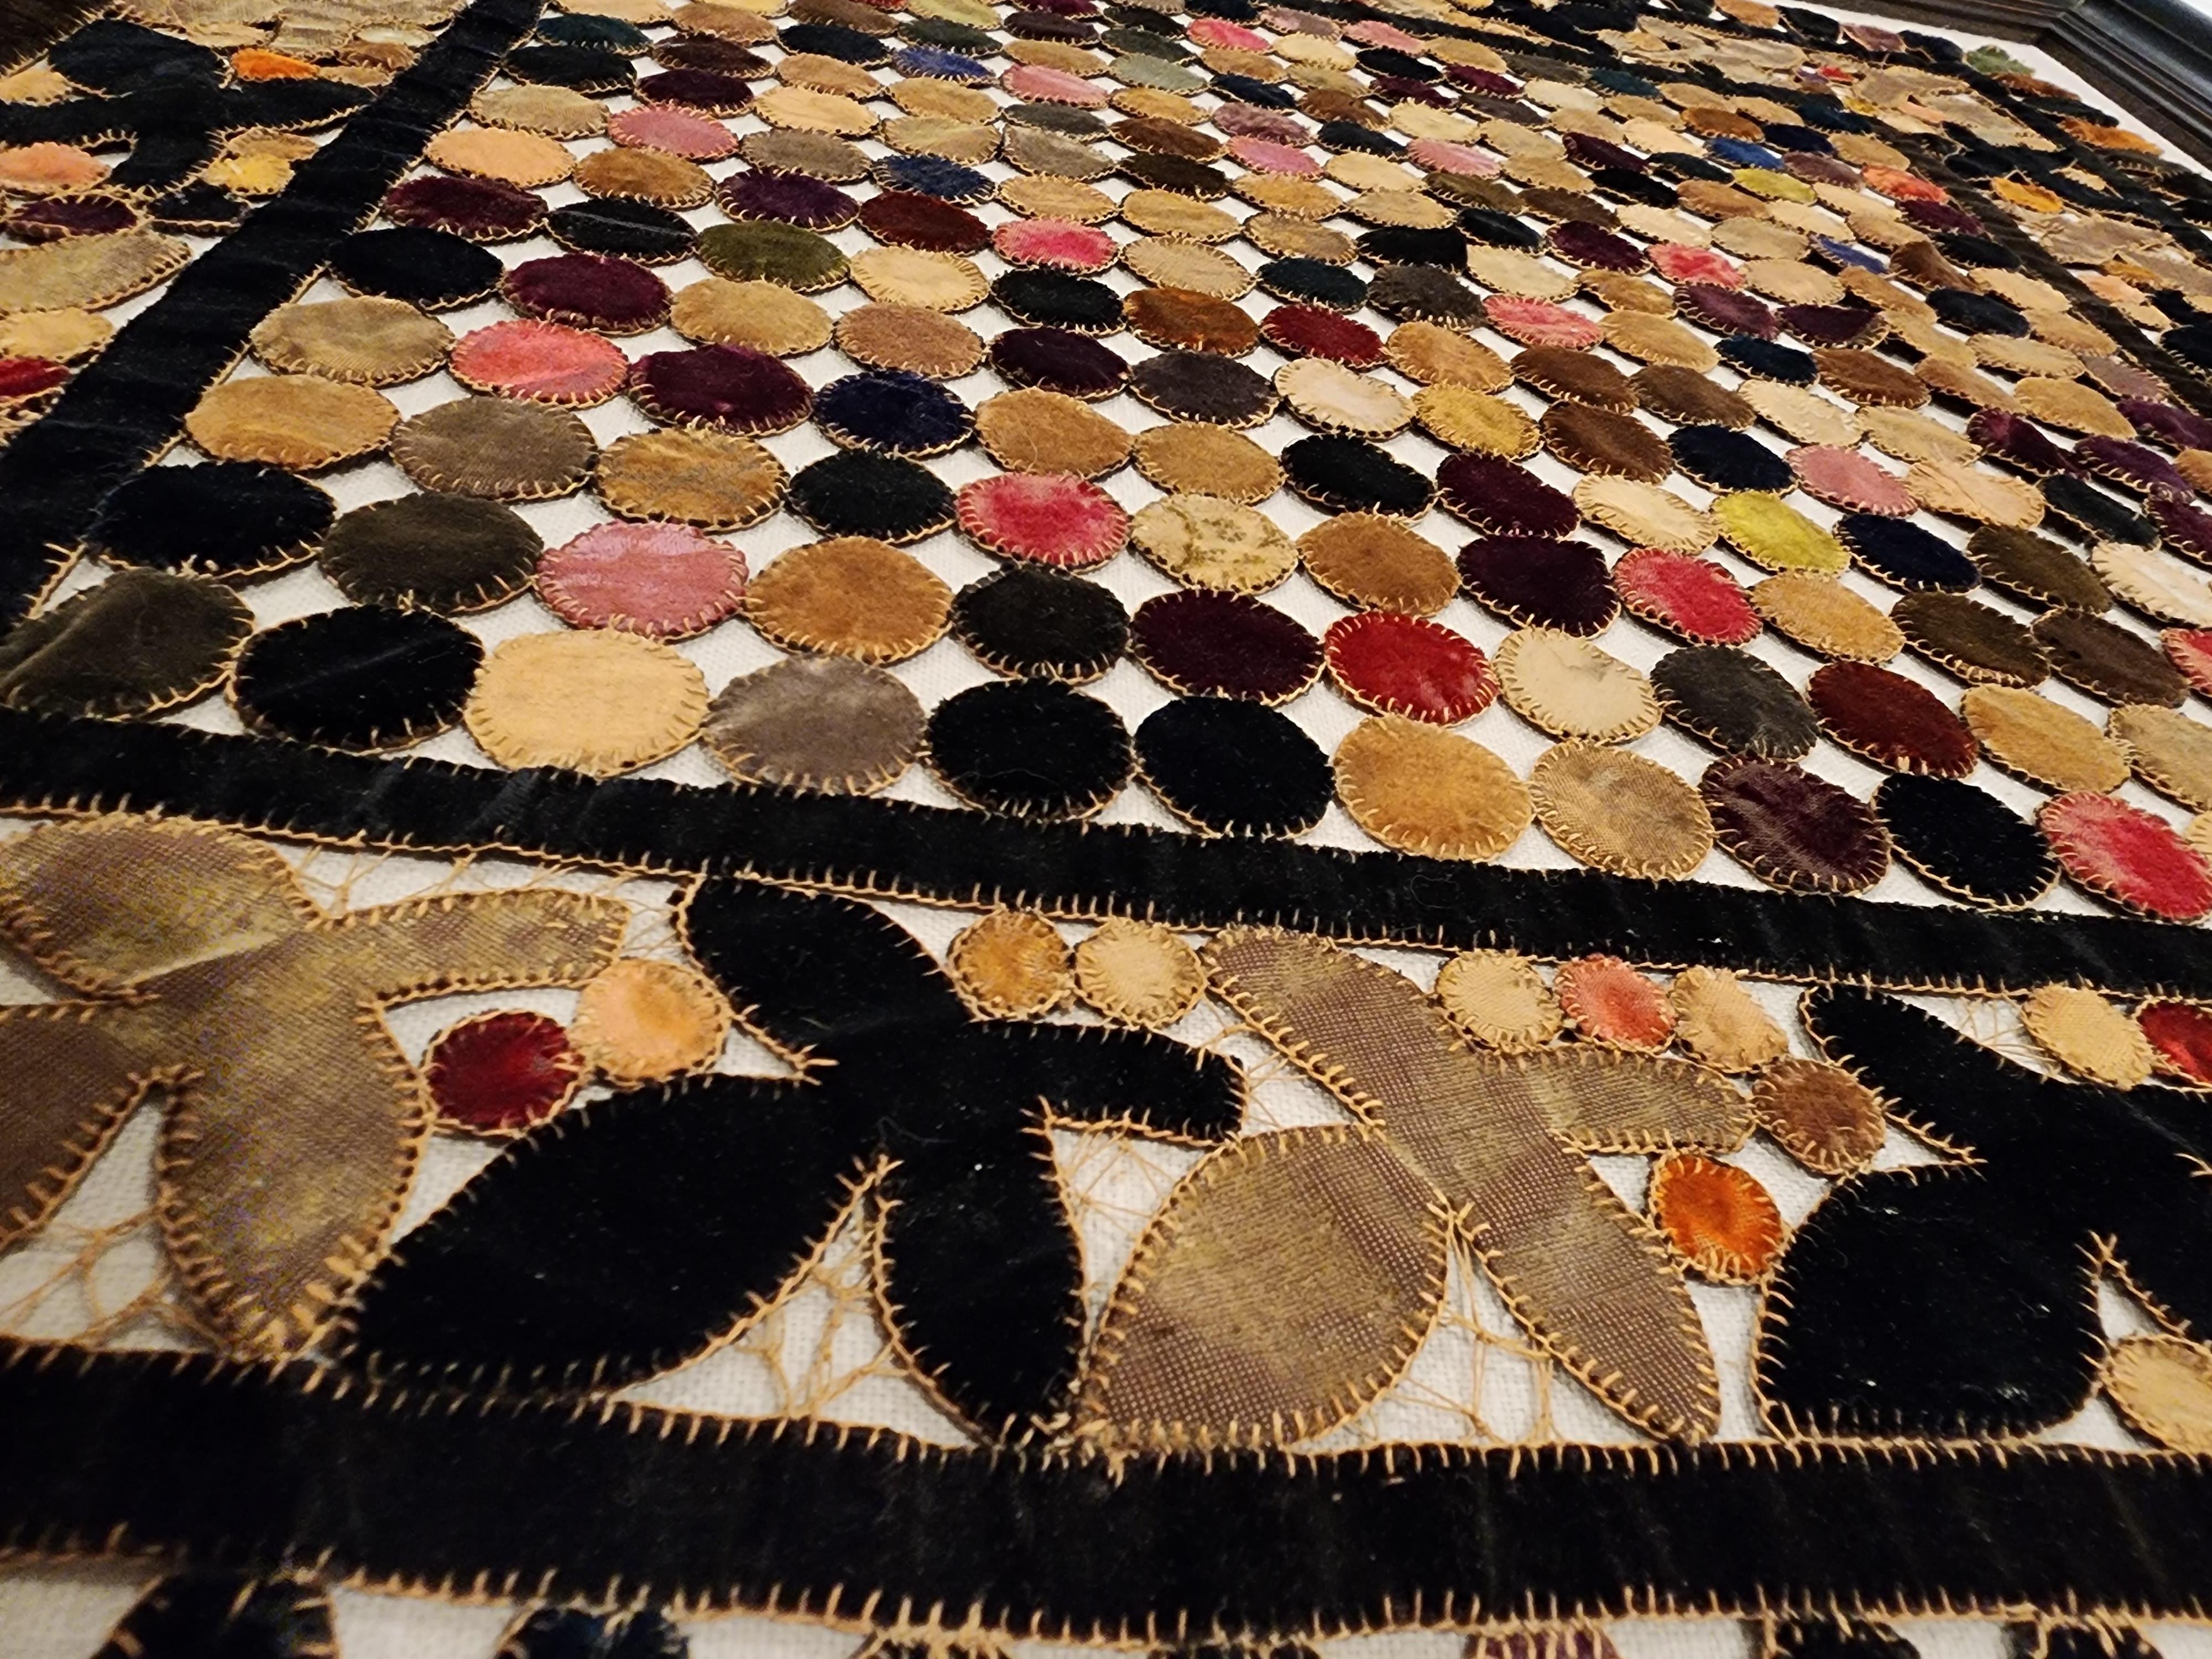 Cotton 19th Century American Penny Table Rug 